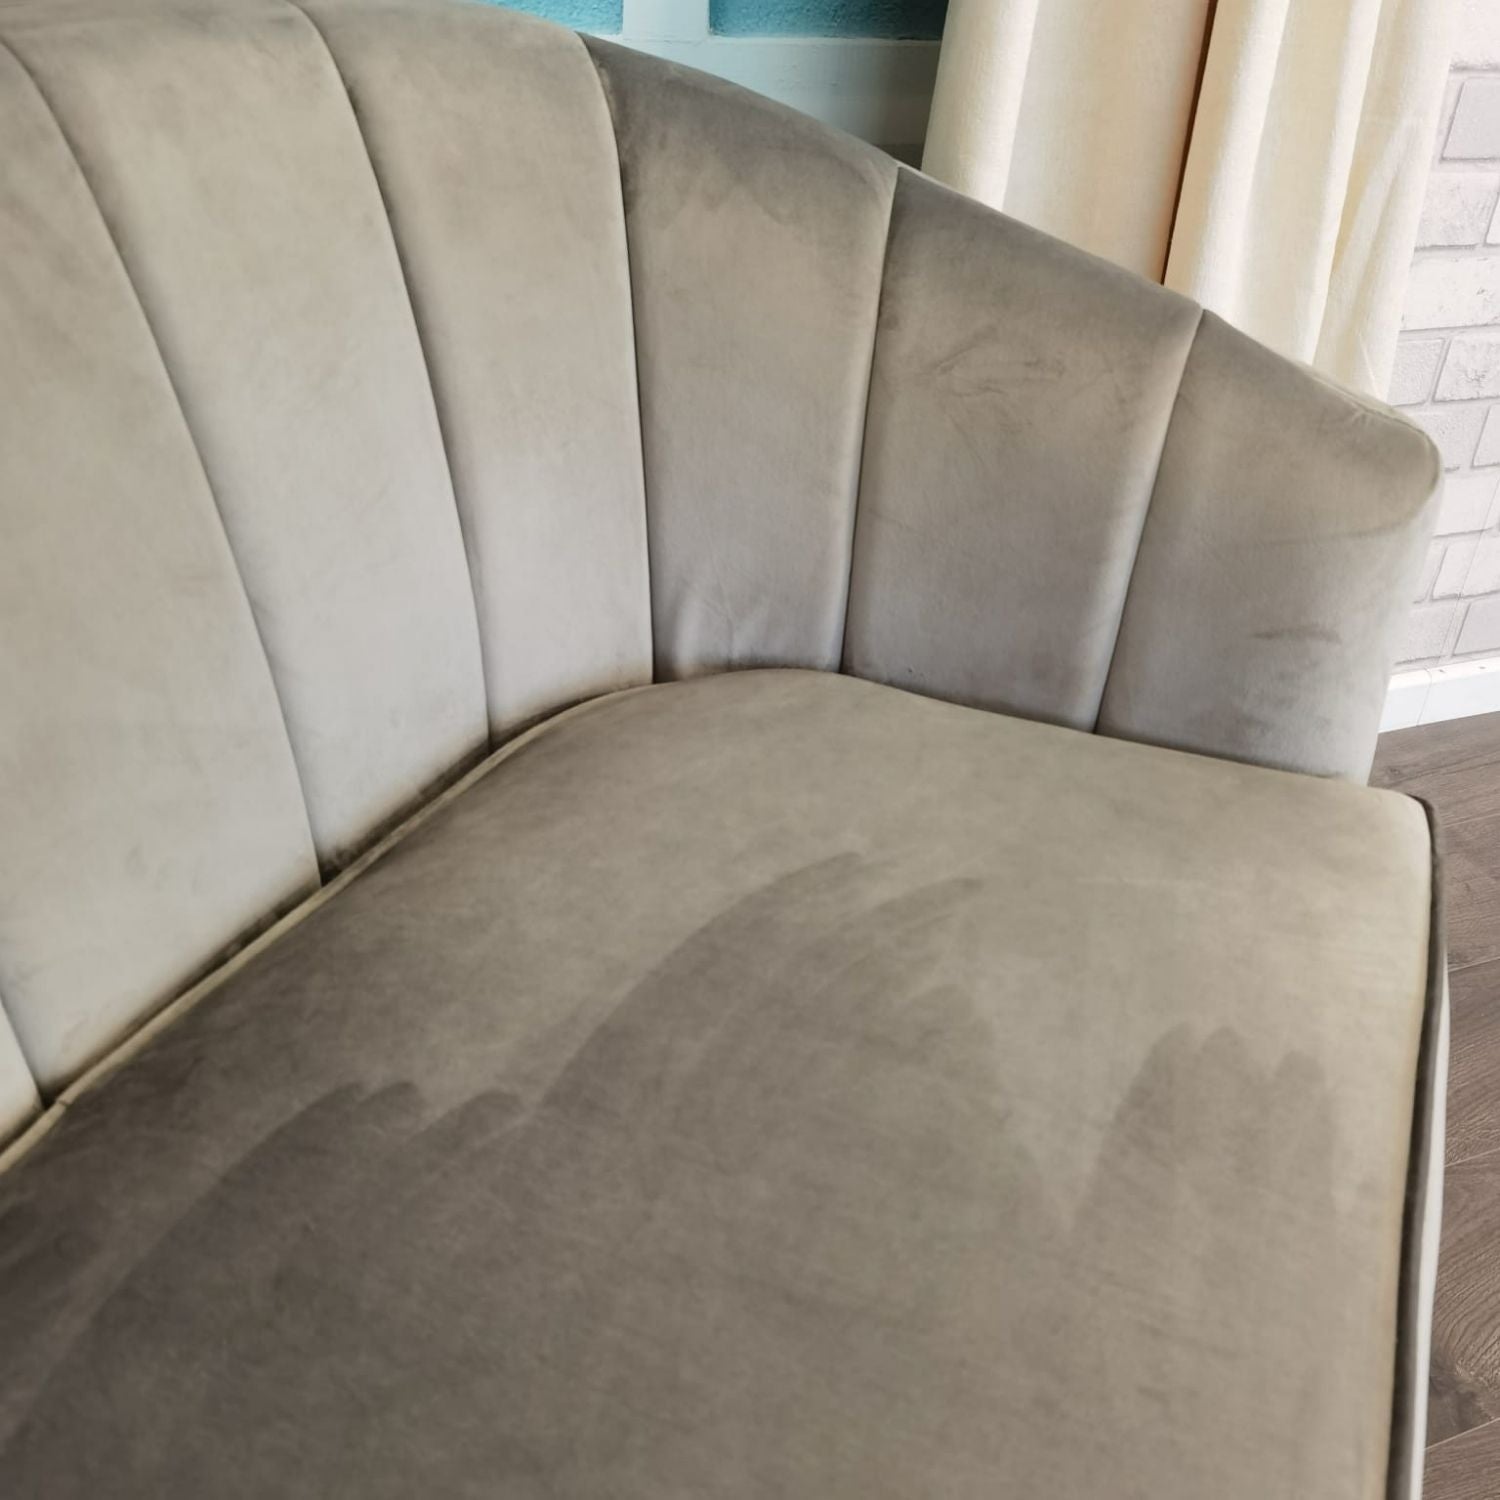 The Home Living Room 2 Seater Sofa - Grey 4 Shaws Department Stores